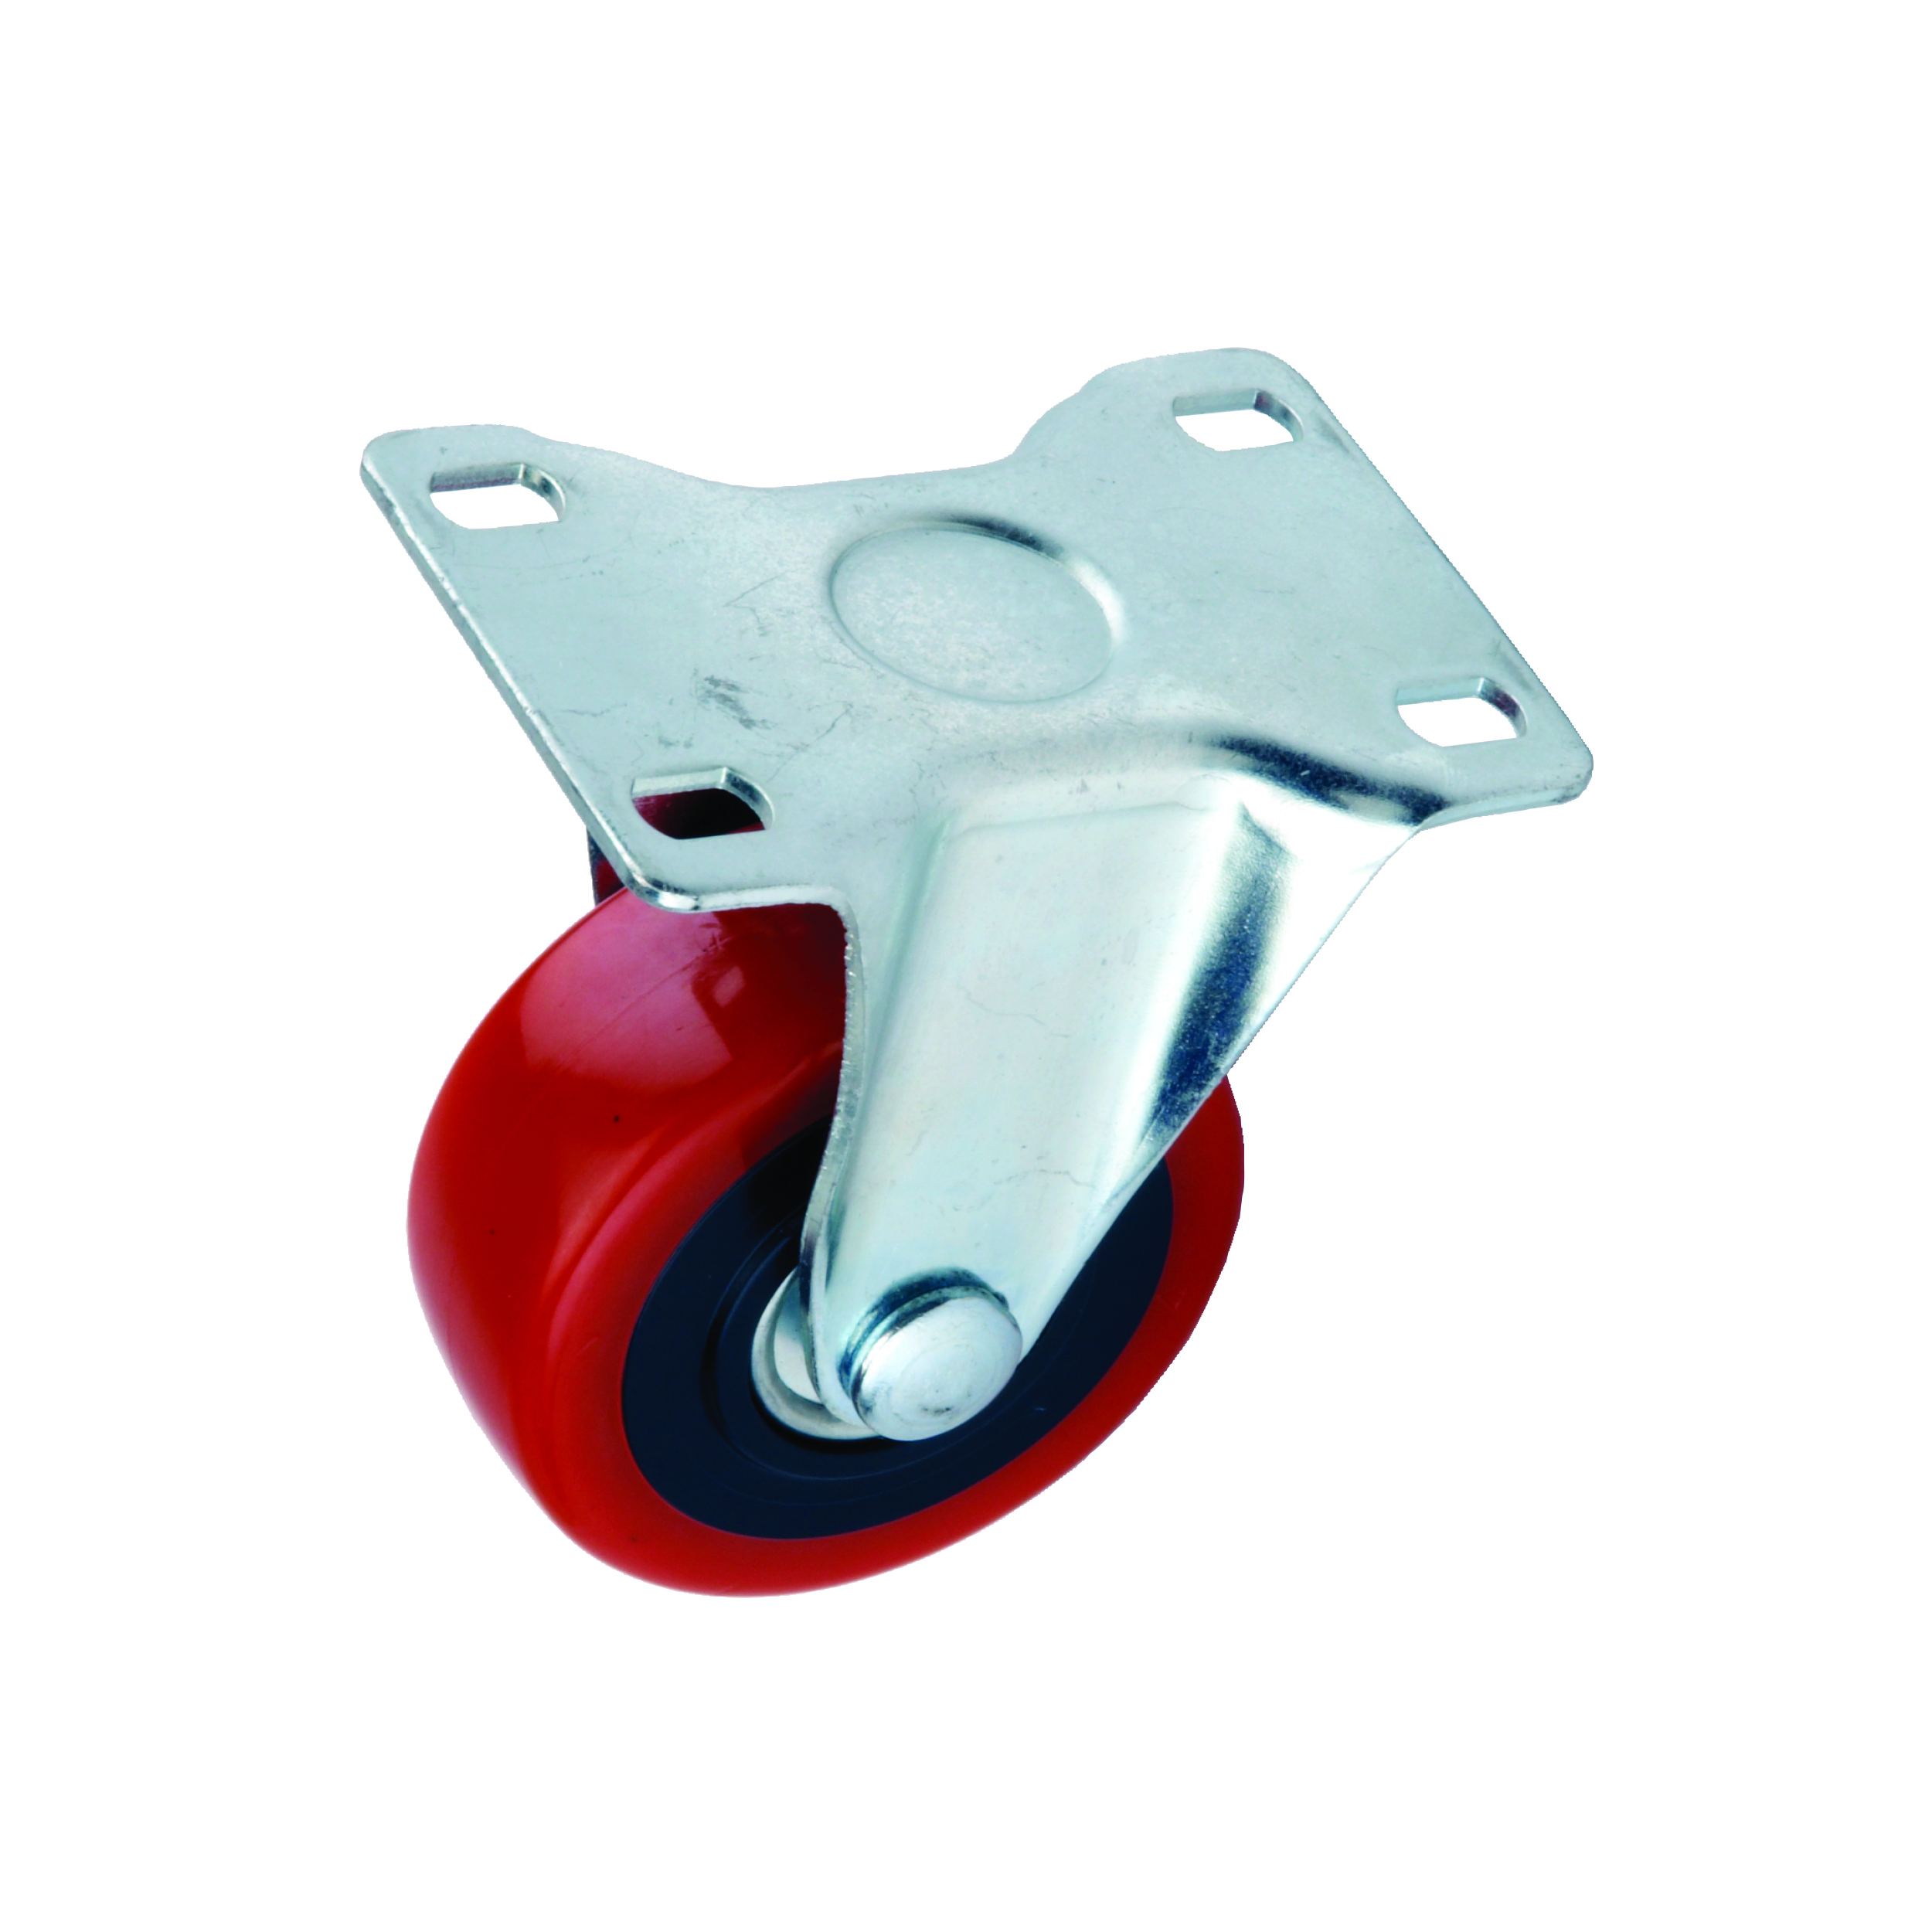 5" Caster, Non-locking, Non-swiveling With 4 Hole Mounting Plate